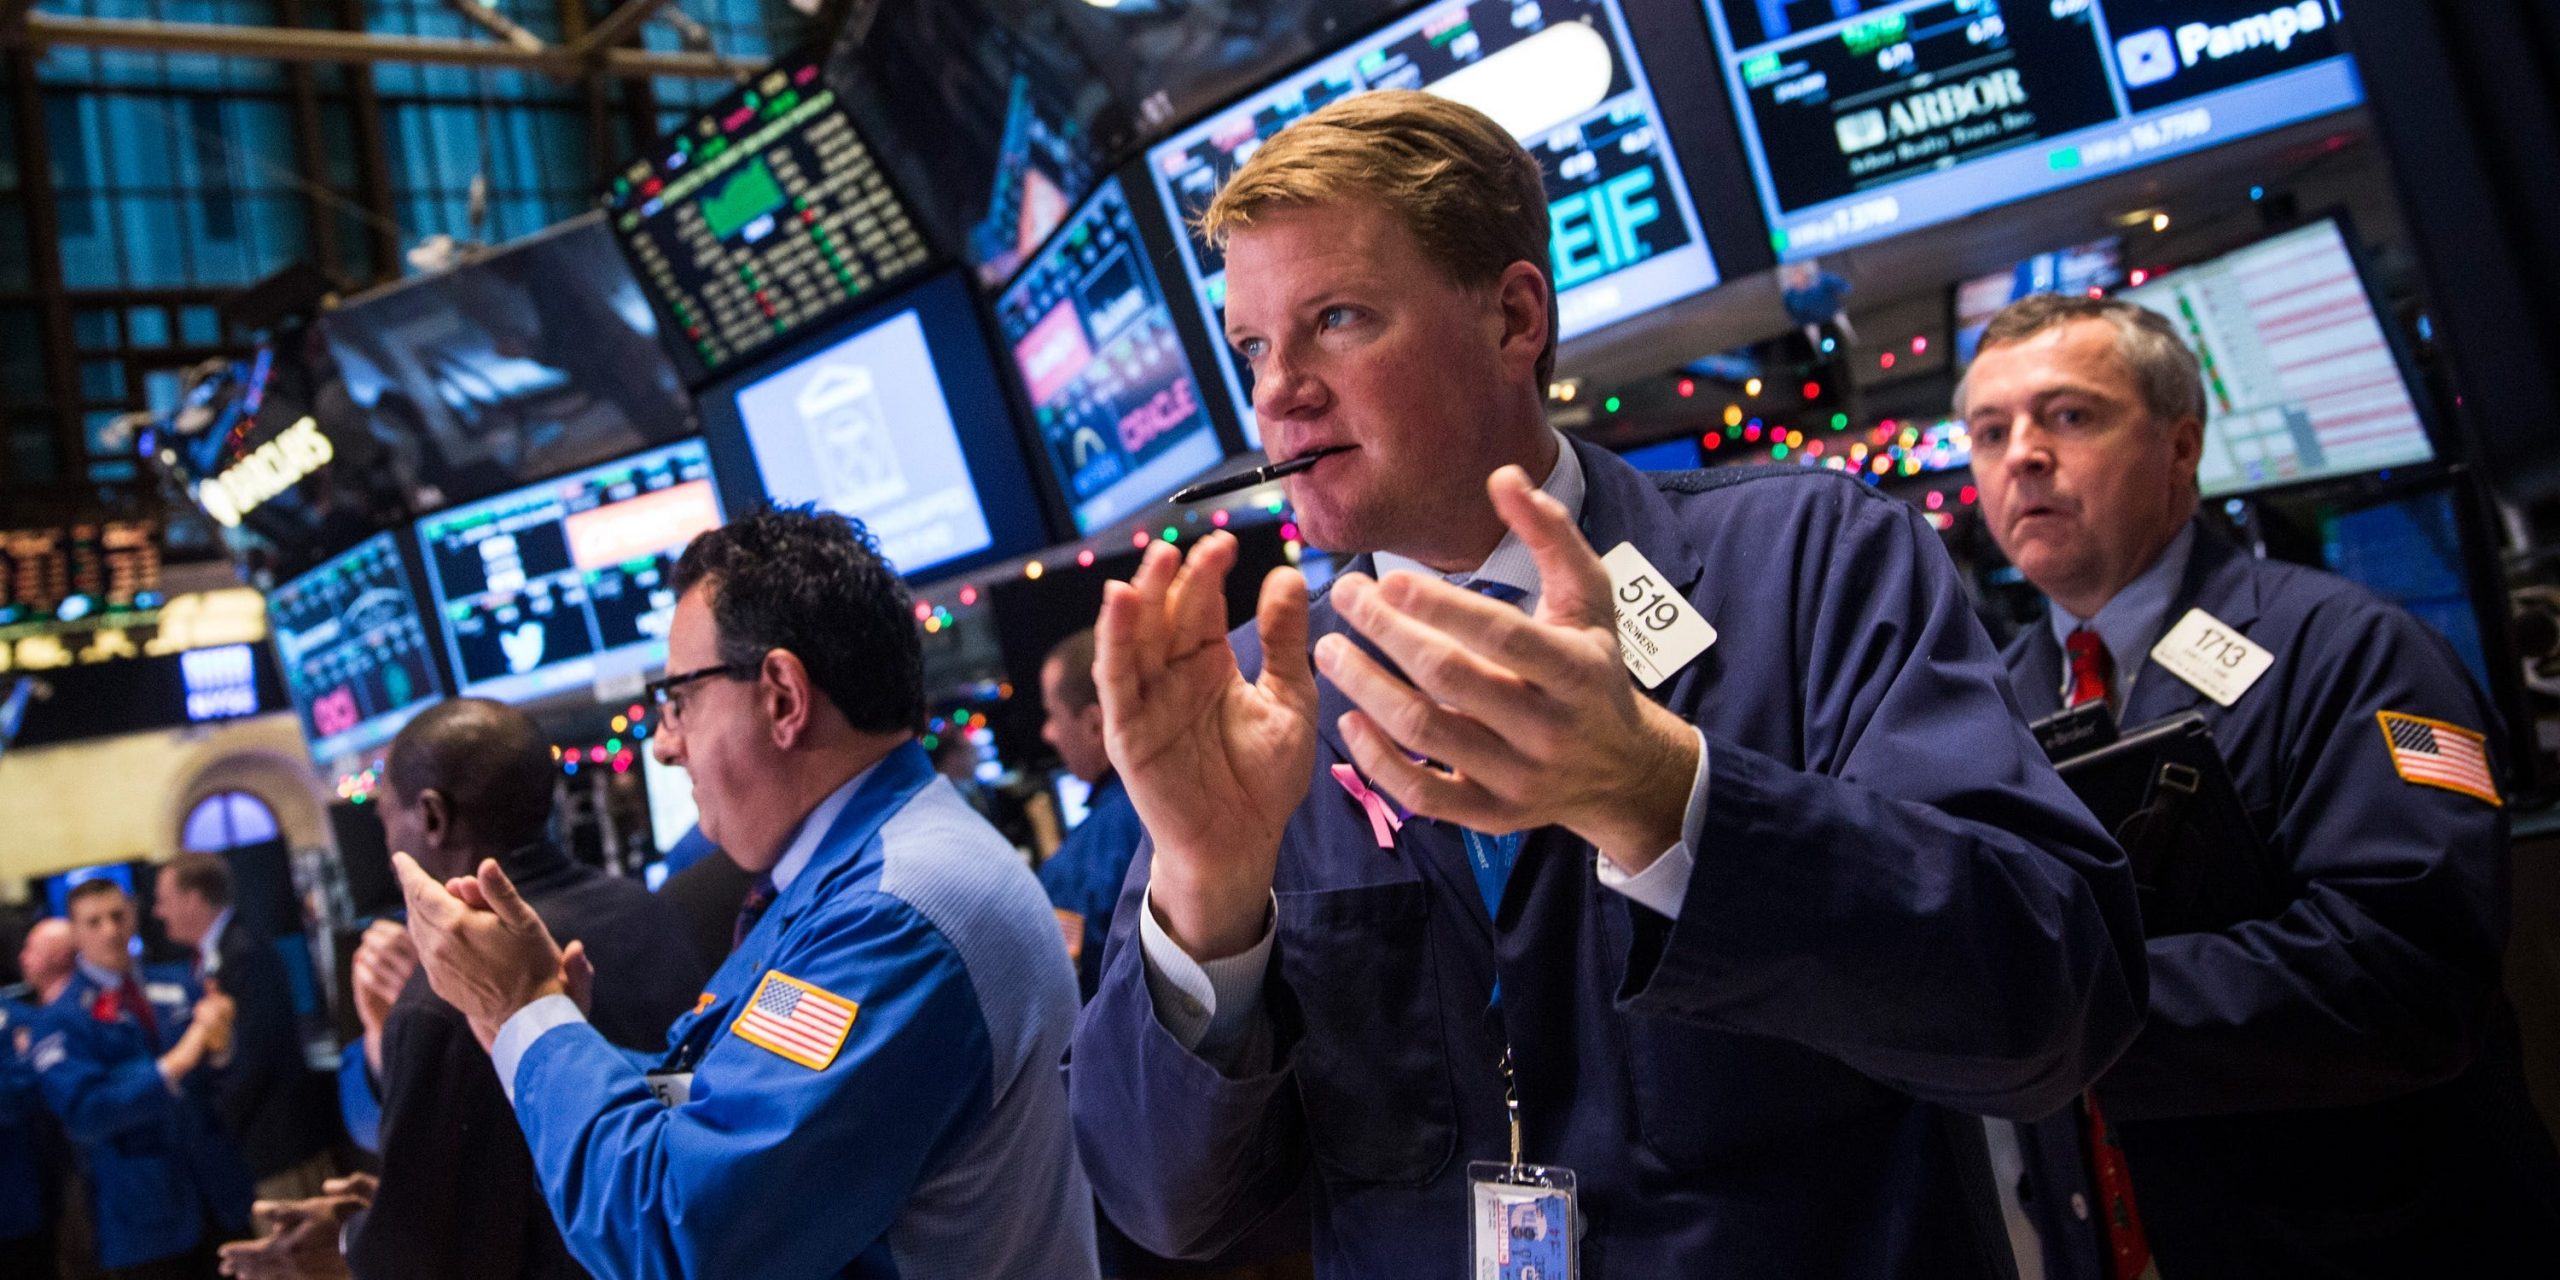 Traders work on the floor of the New York Stock Exchange during the afternoon of December 18, 2014 in New York City.